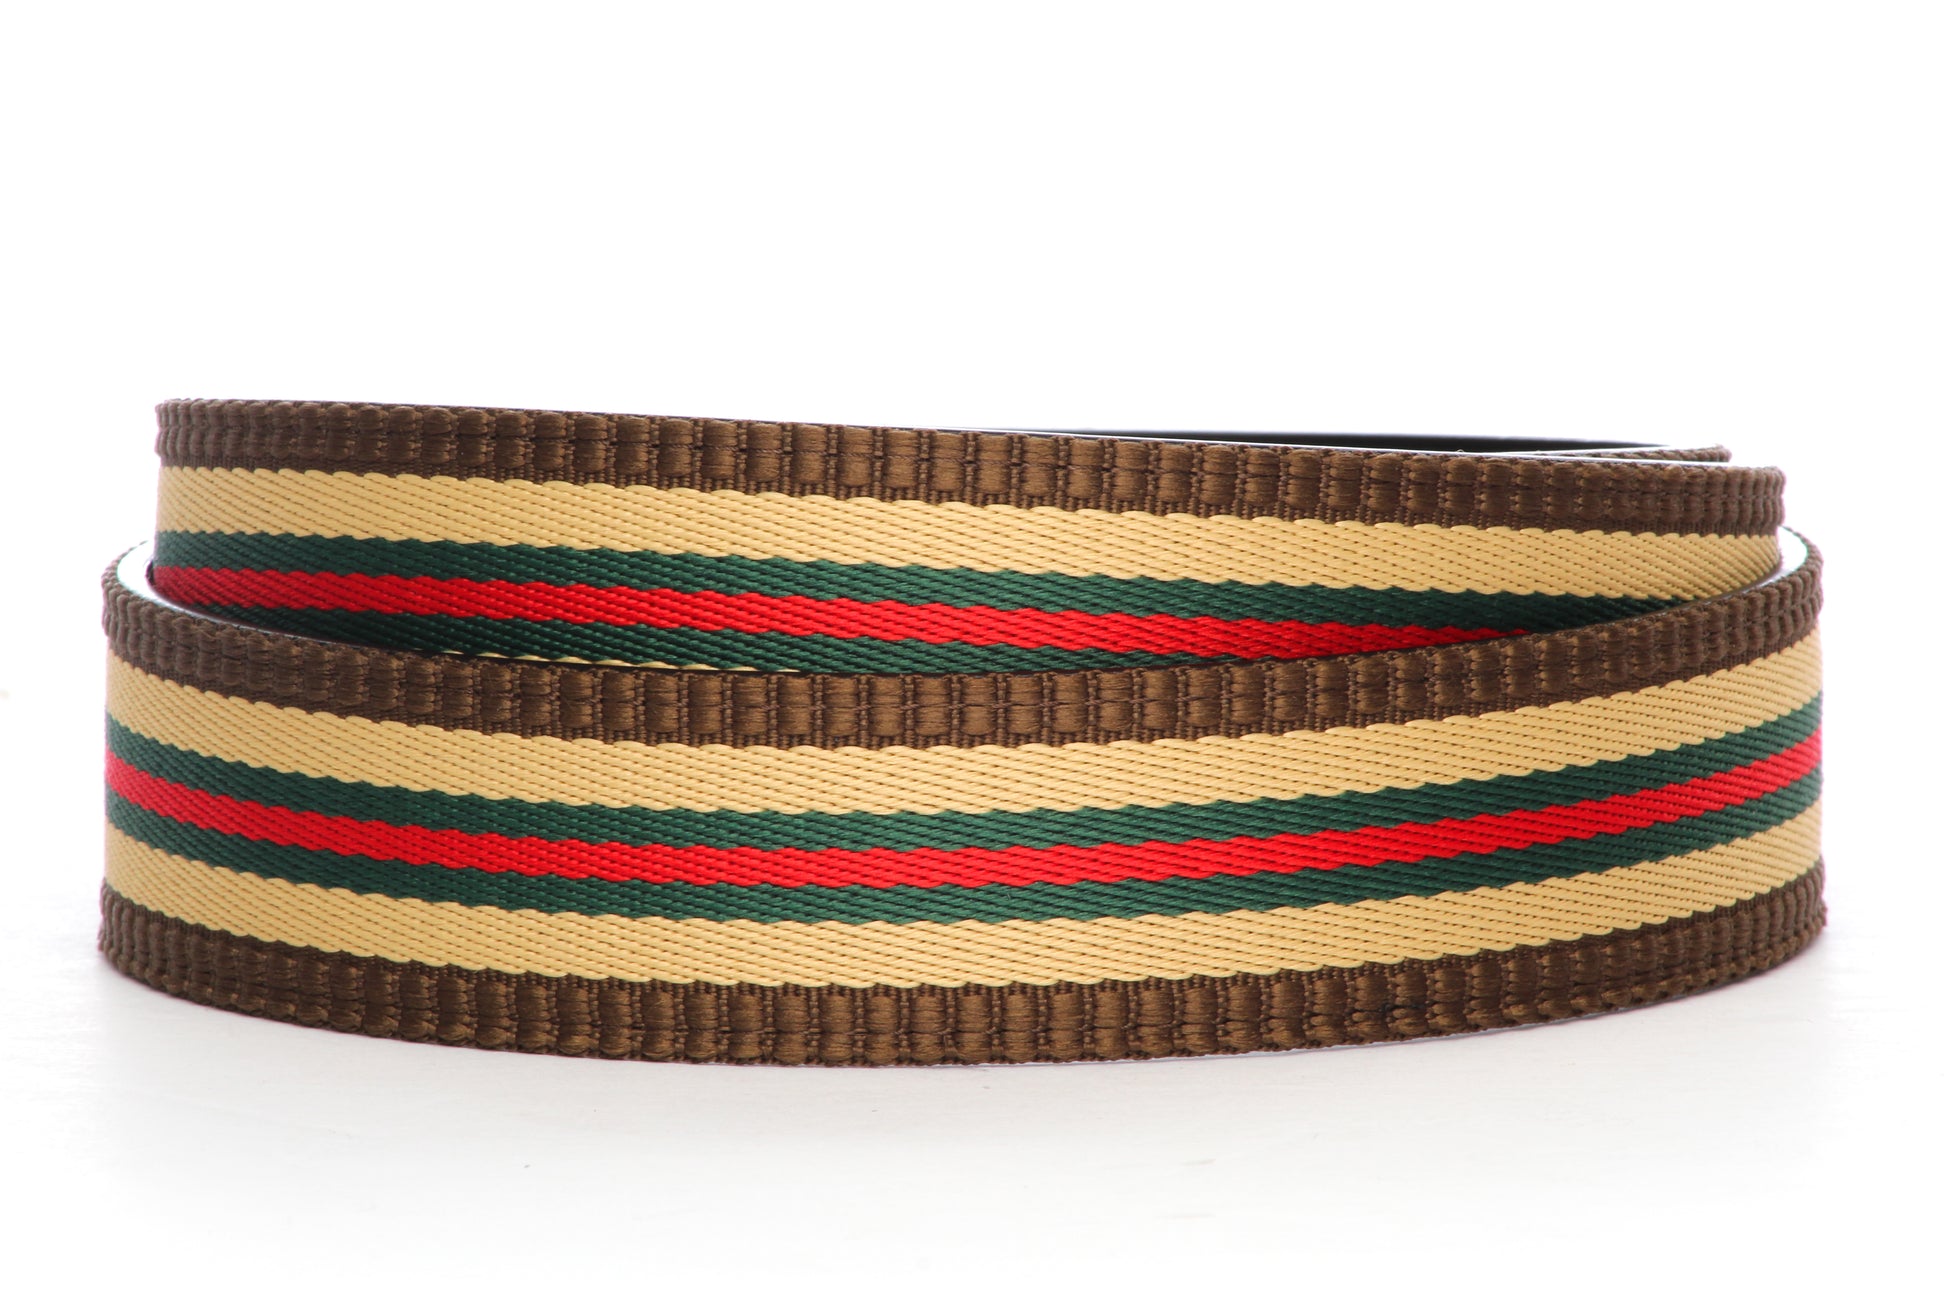 Men's cloth belt strap in green-red stripe with trim, 1.5 inches wide, casual look